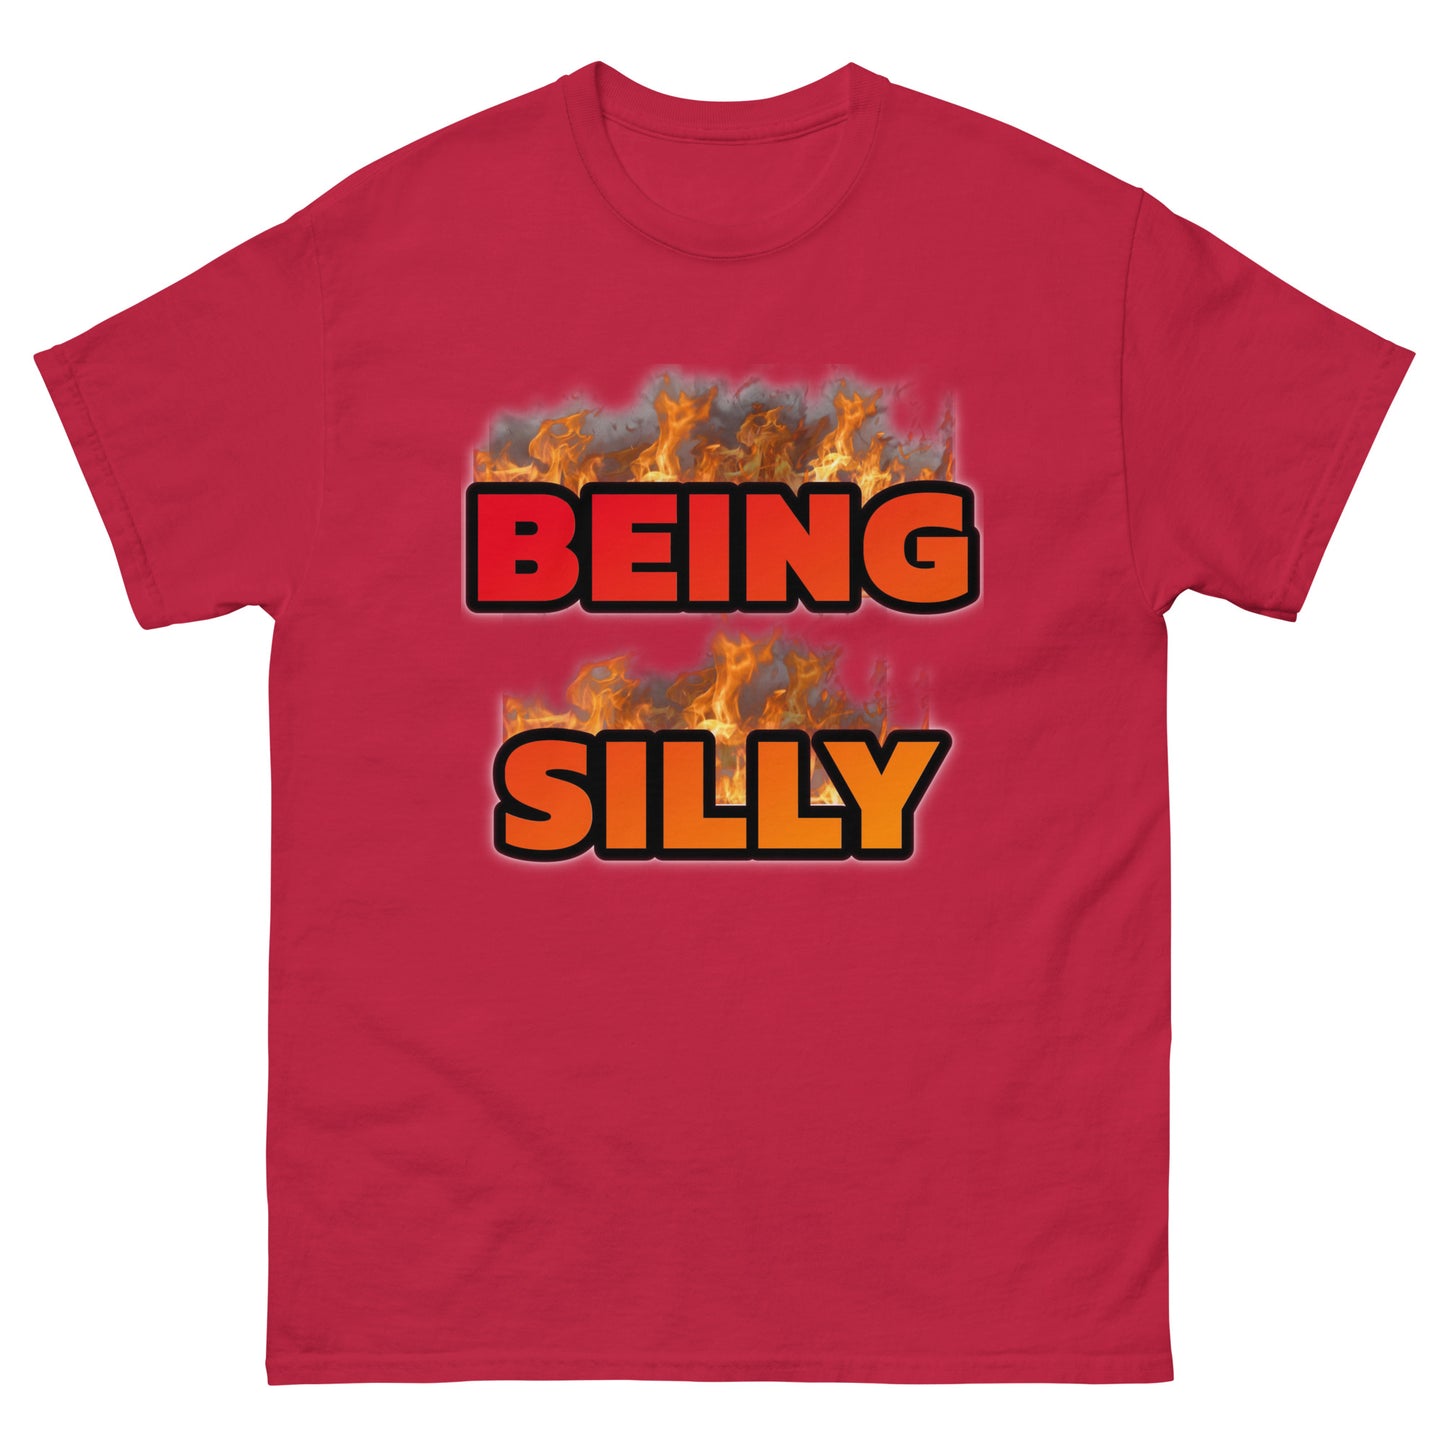 Being Silly Cringey Tee